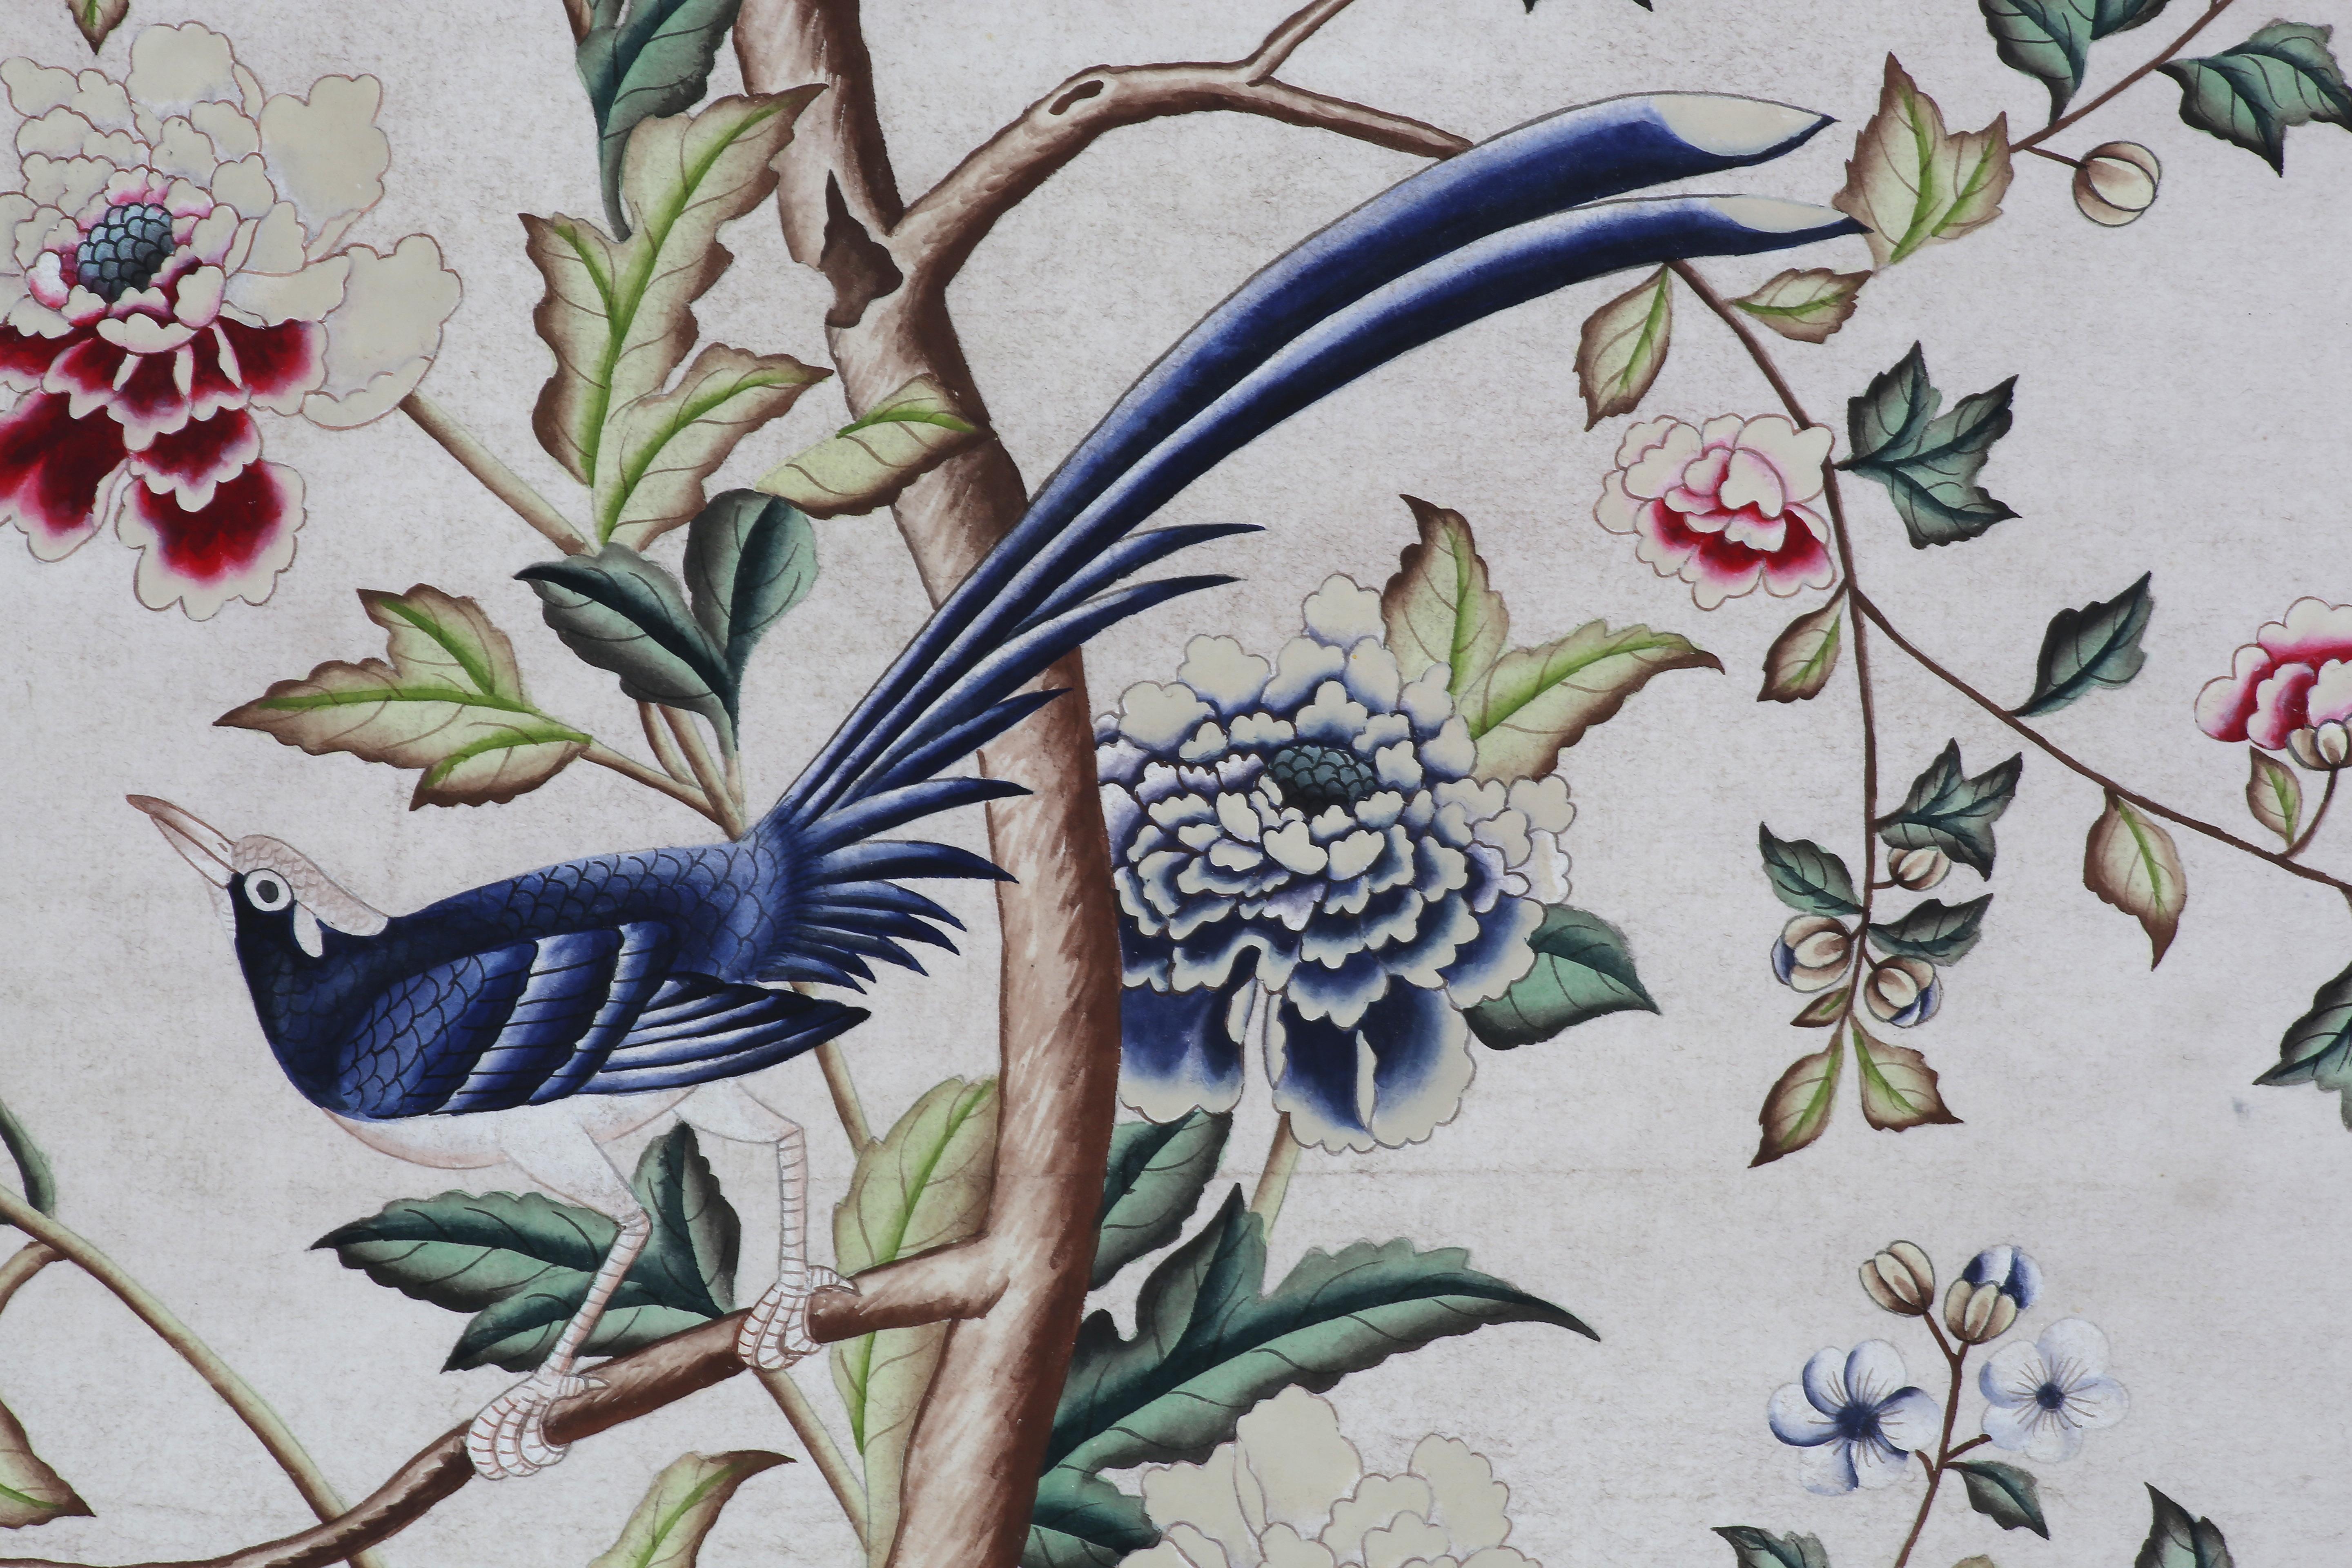 Paper Chinoiserie Hand Painted Wallpaper Panels of Birds and Blossoms